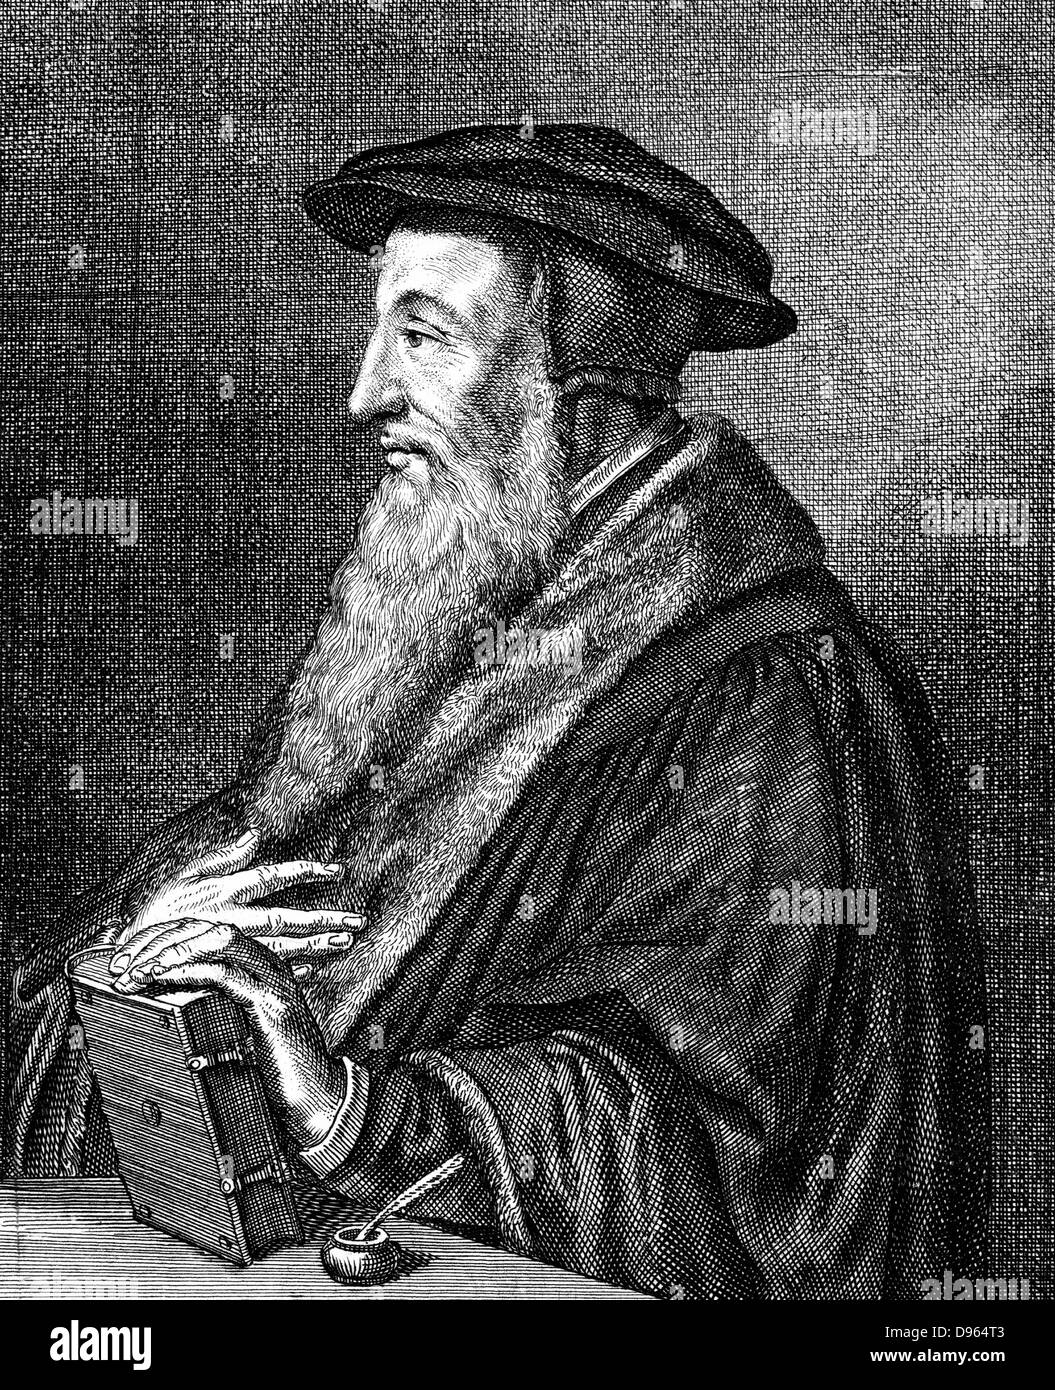 Jean Calvin (1509-1564) French theologian. Protestant reformer. He settled Geneva and was leading figure in the Protestant Reformation. Gave his name to the strict form of Protestantism, Calvinism. Copperplate engraving by Konrad Meyer (1616-1689). Stock Photo